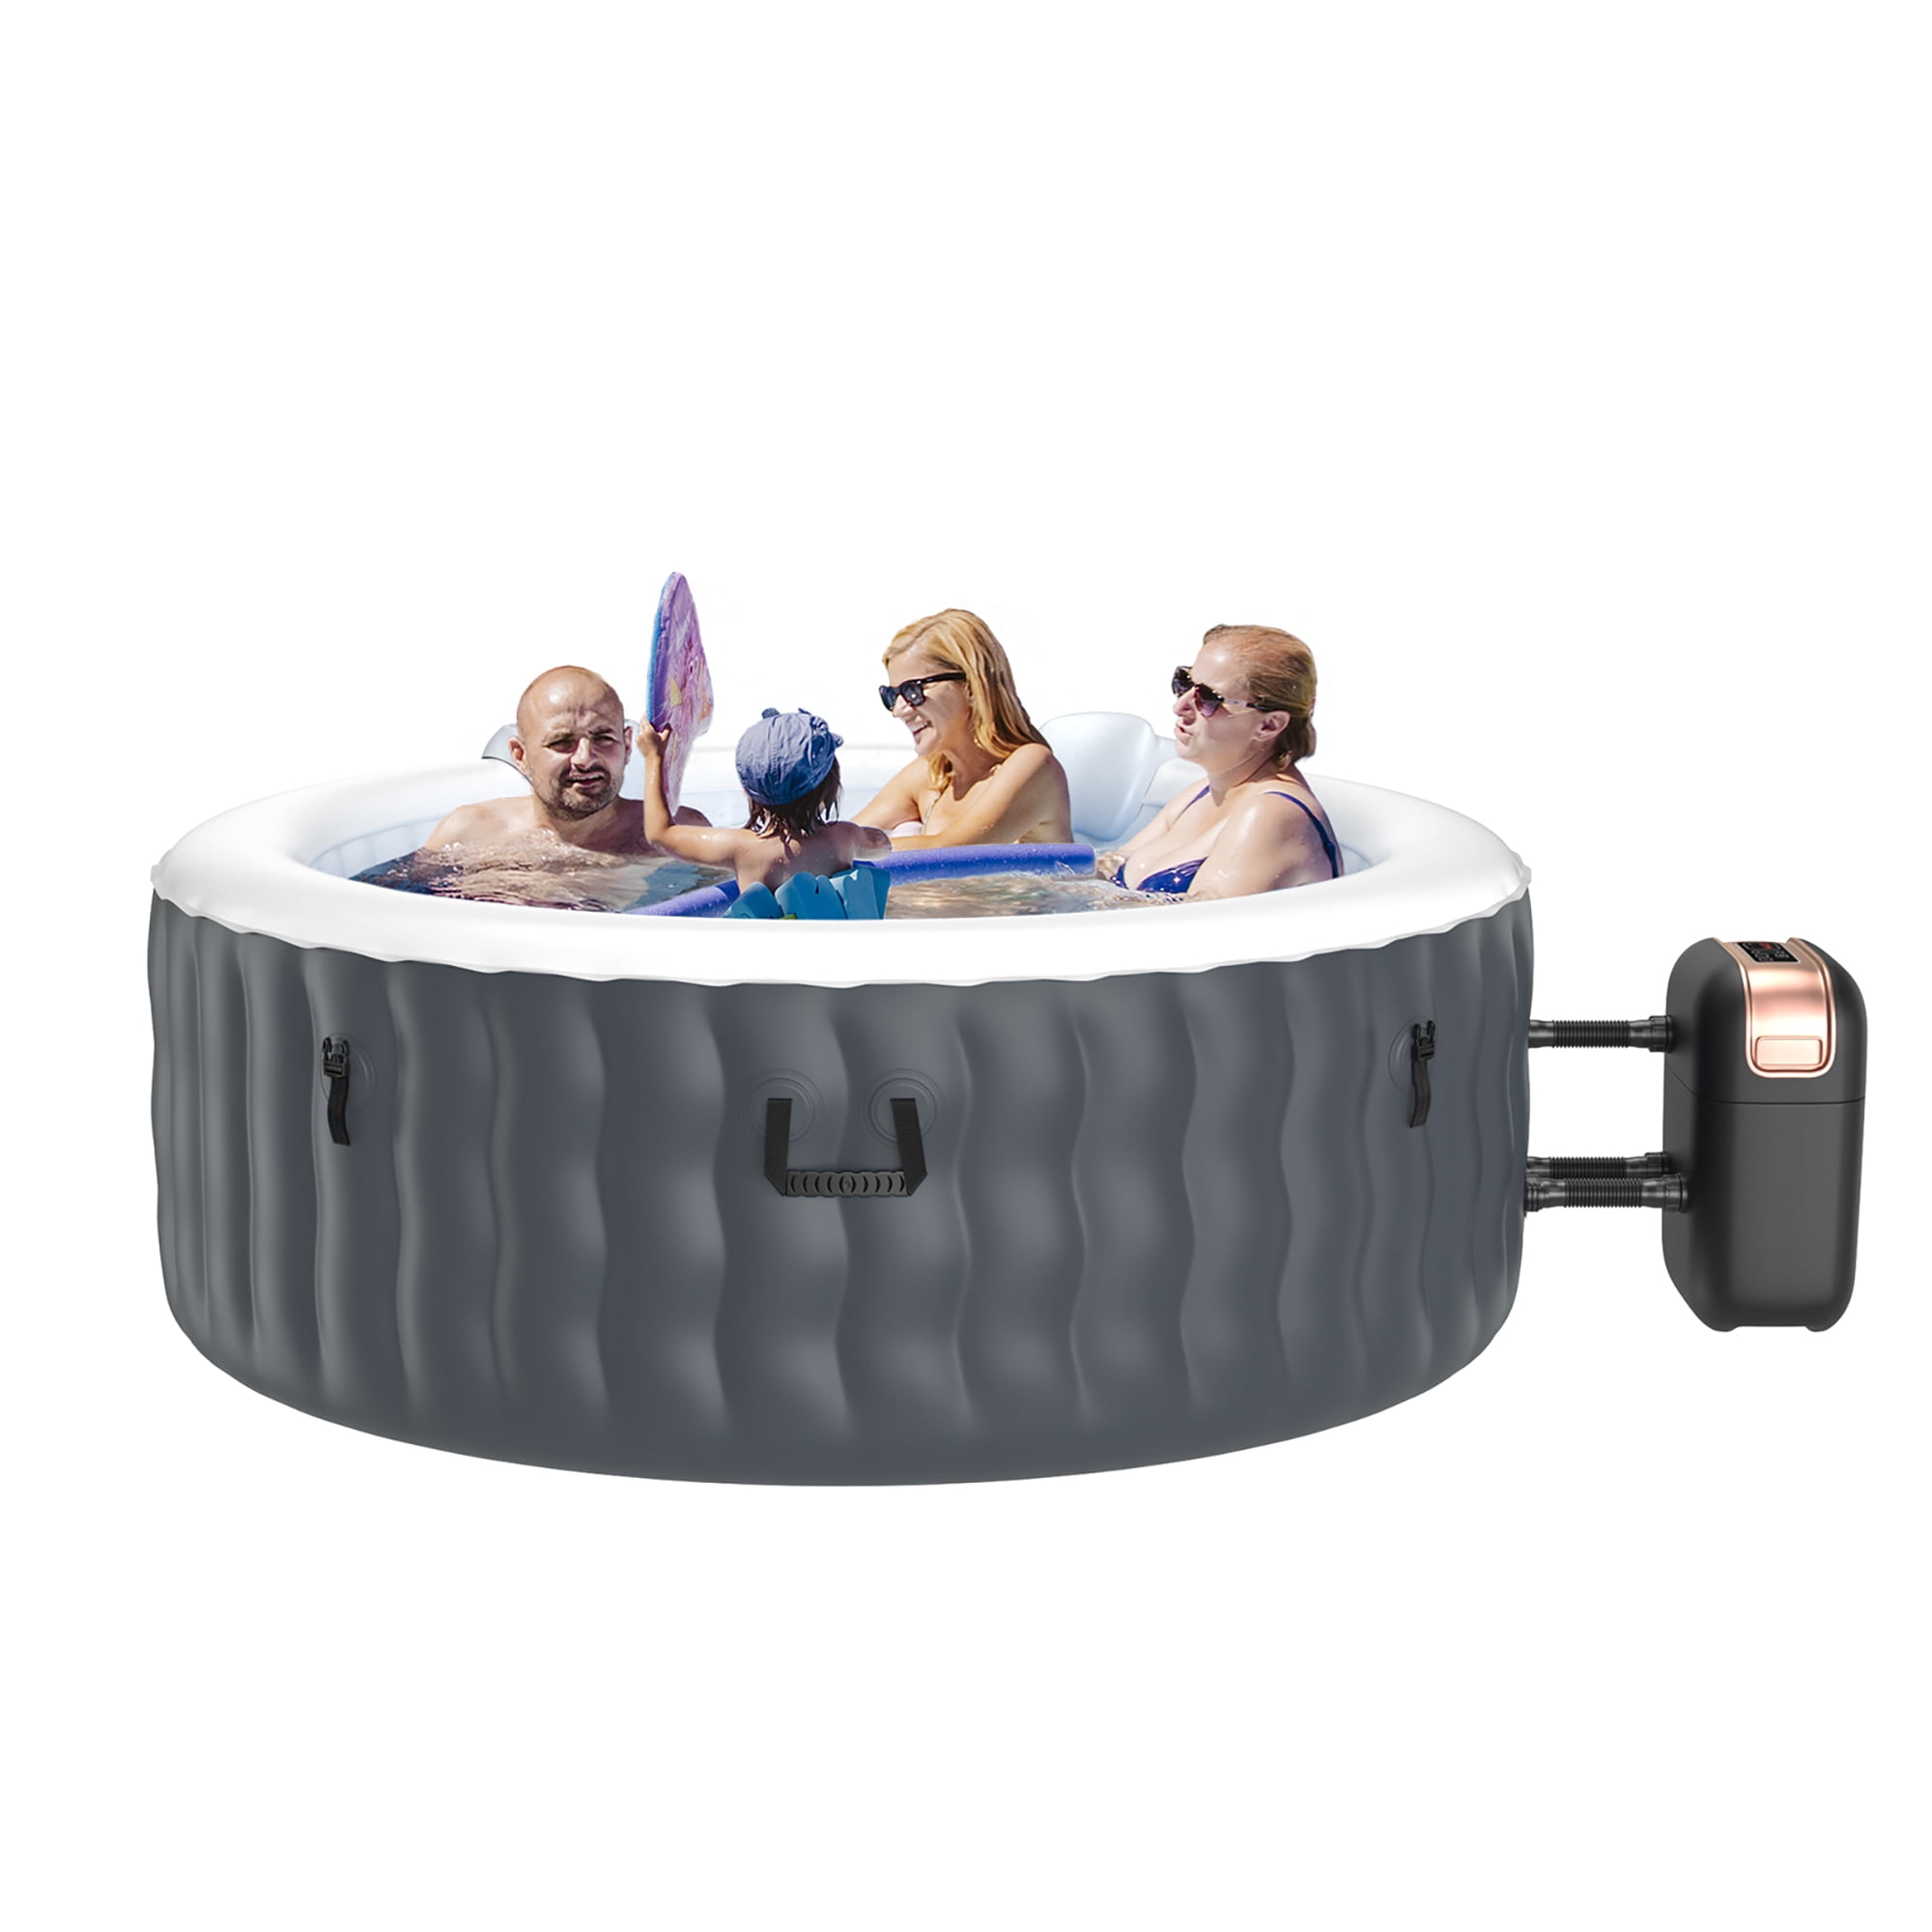 Skroutz Outdoor Portable Massage Hot Tub 4 Person Water Pool Floats Digital Spa Inflatable Bubble Jet Therapy Tan 